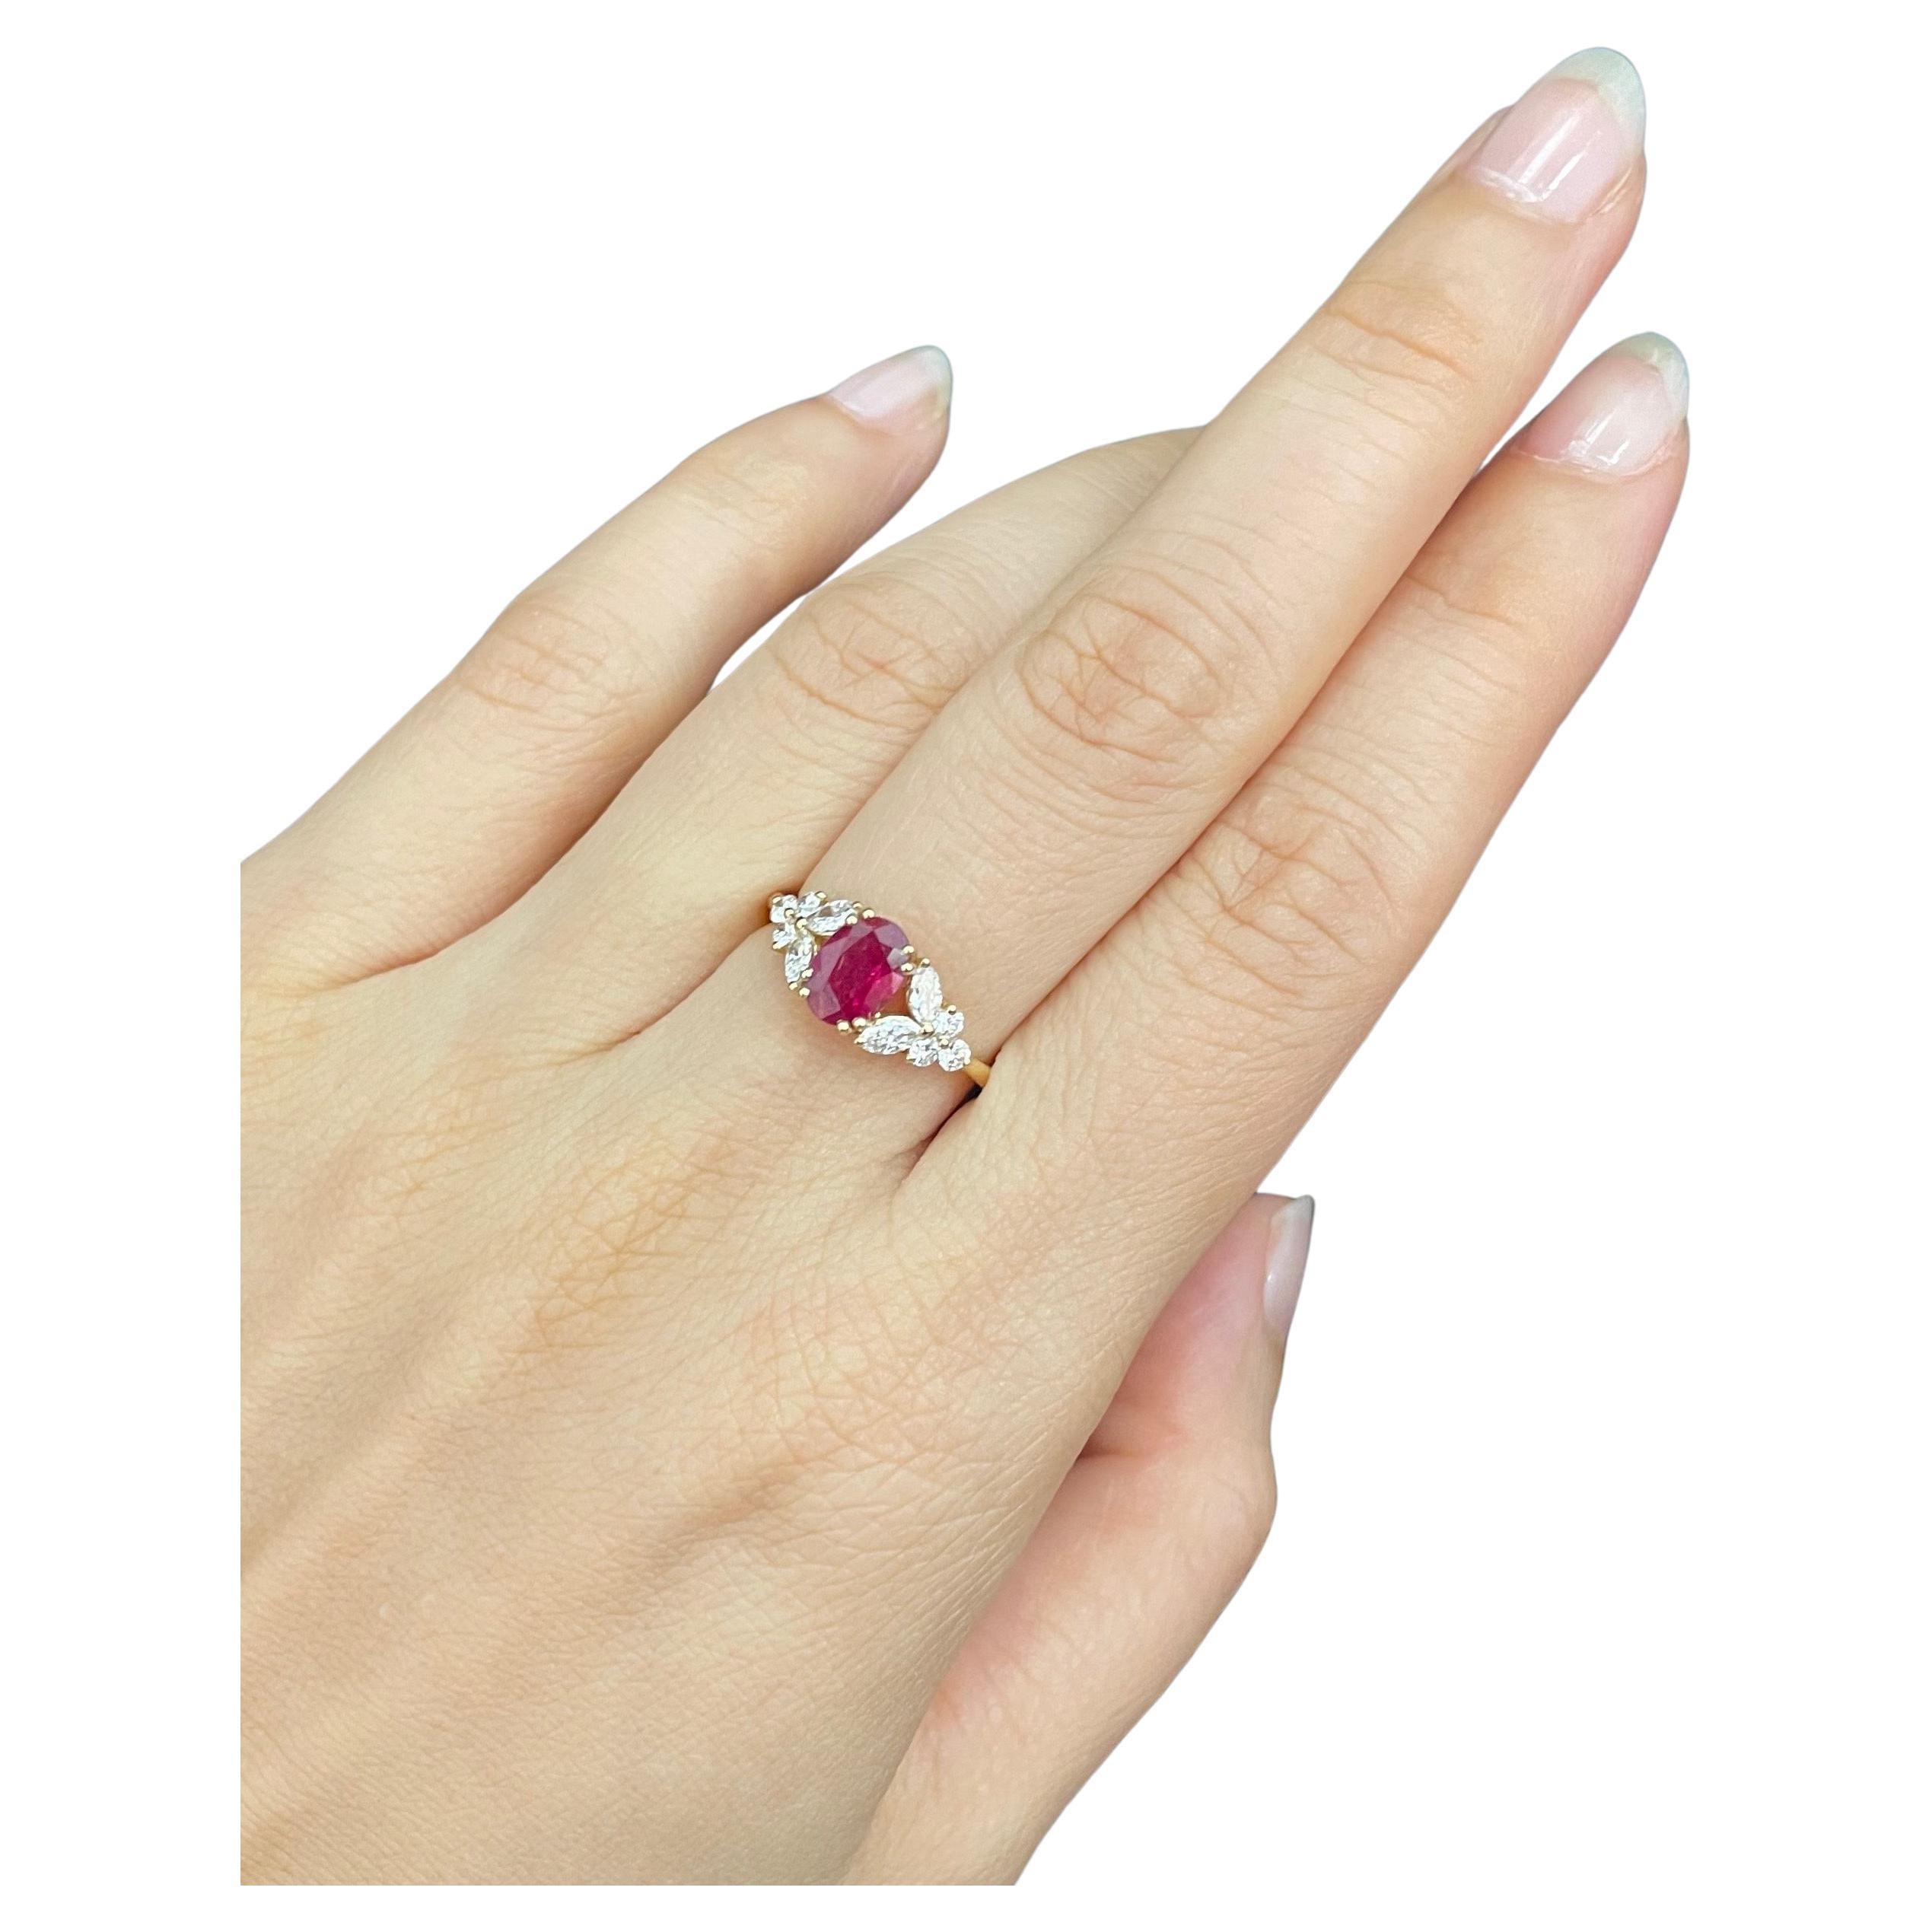 For Sale:  1ct Ruby Gemstone with Marquise Diamond Ring